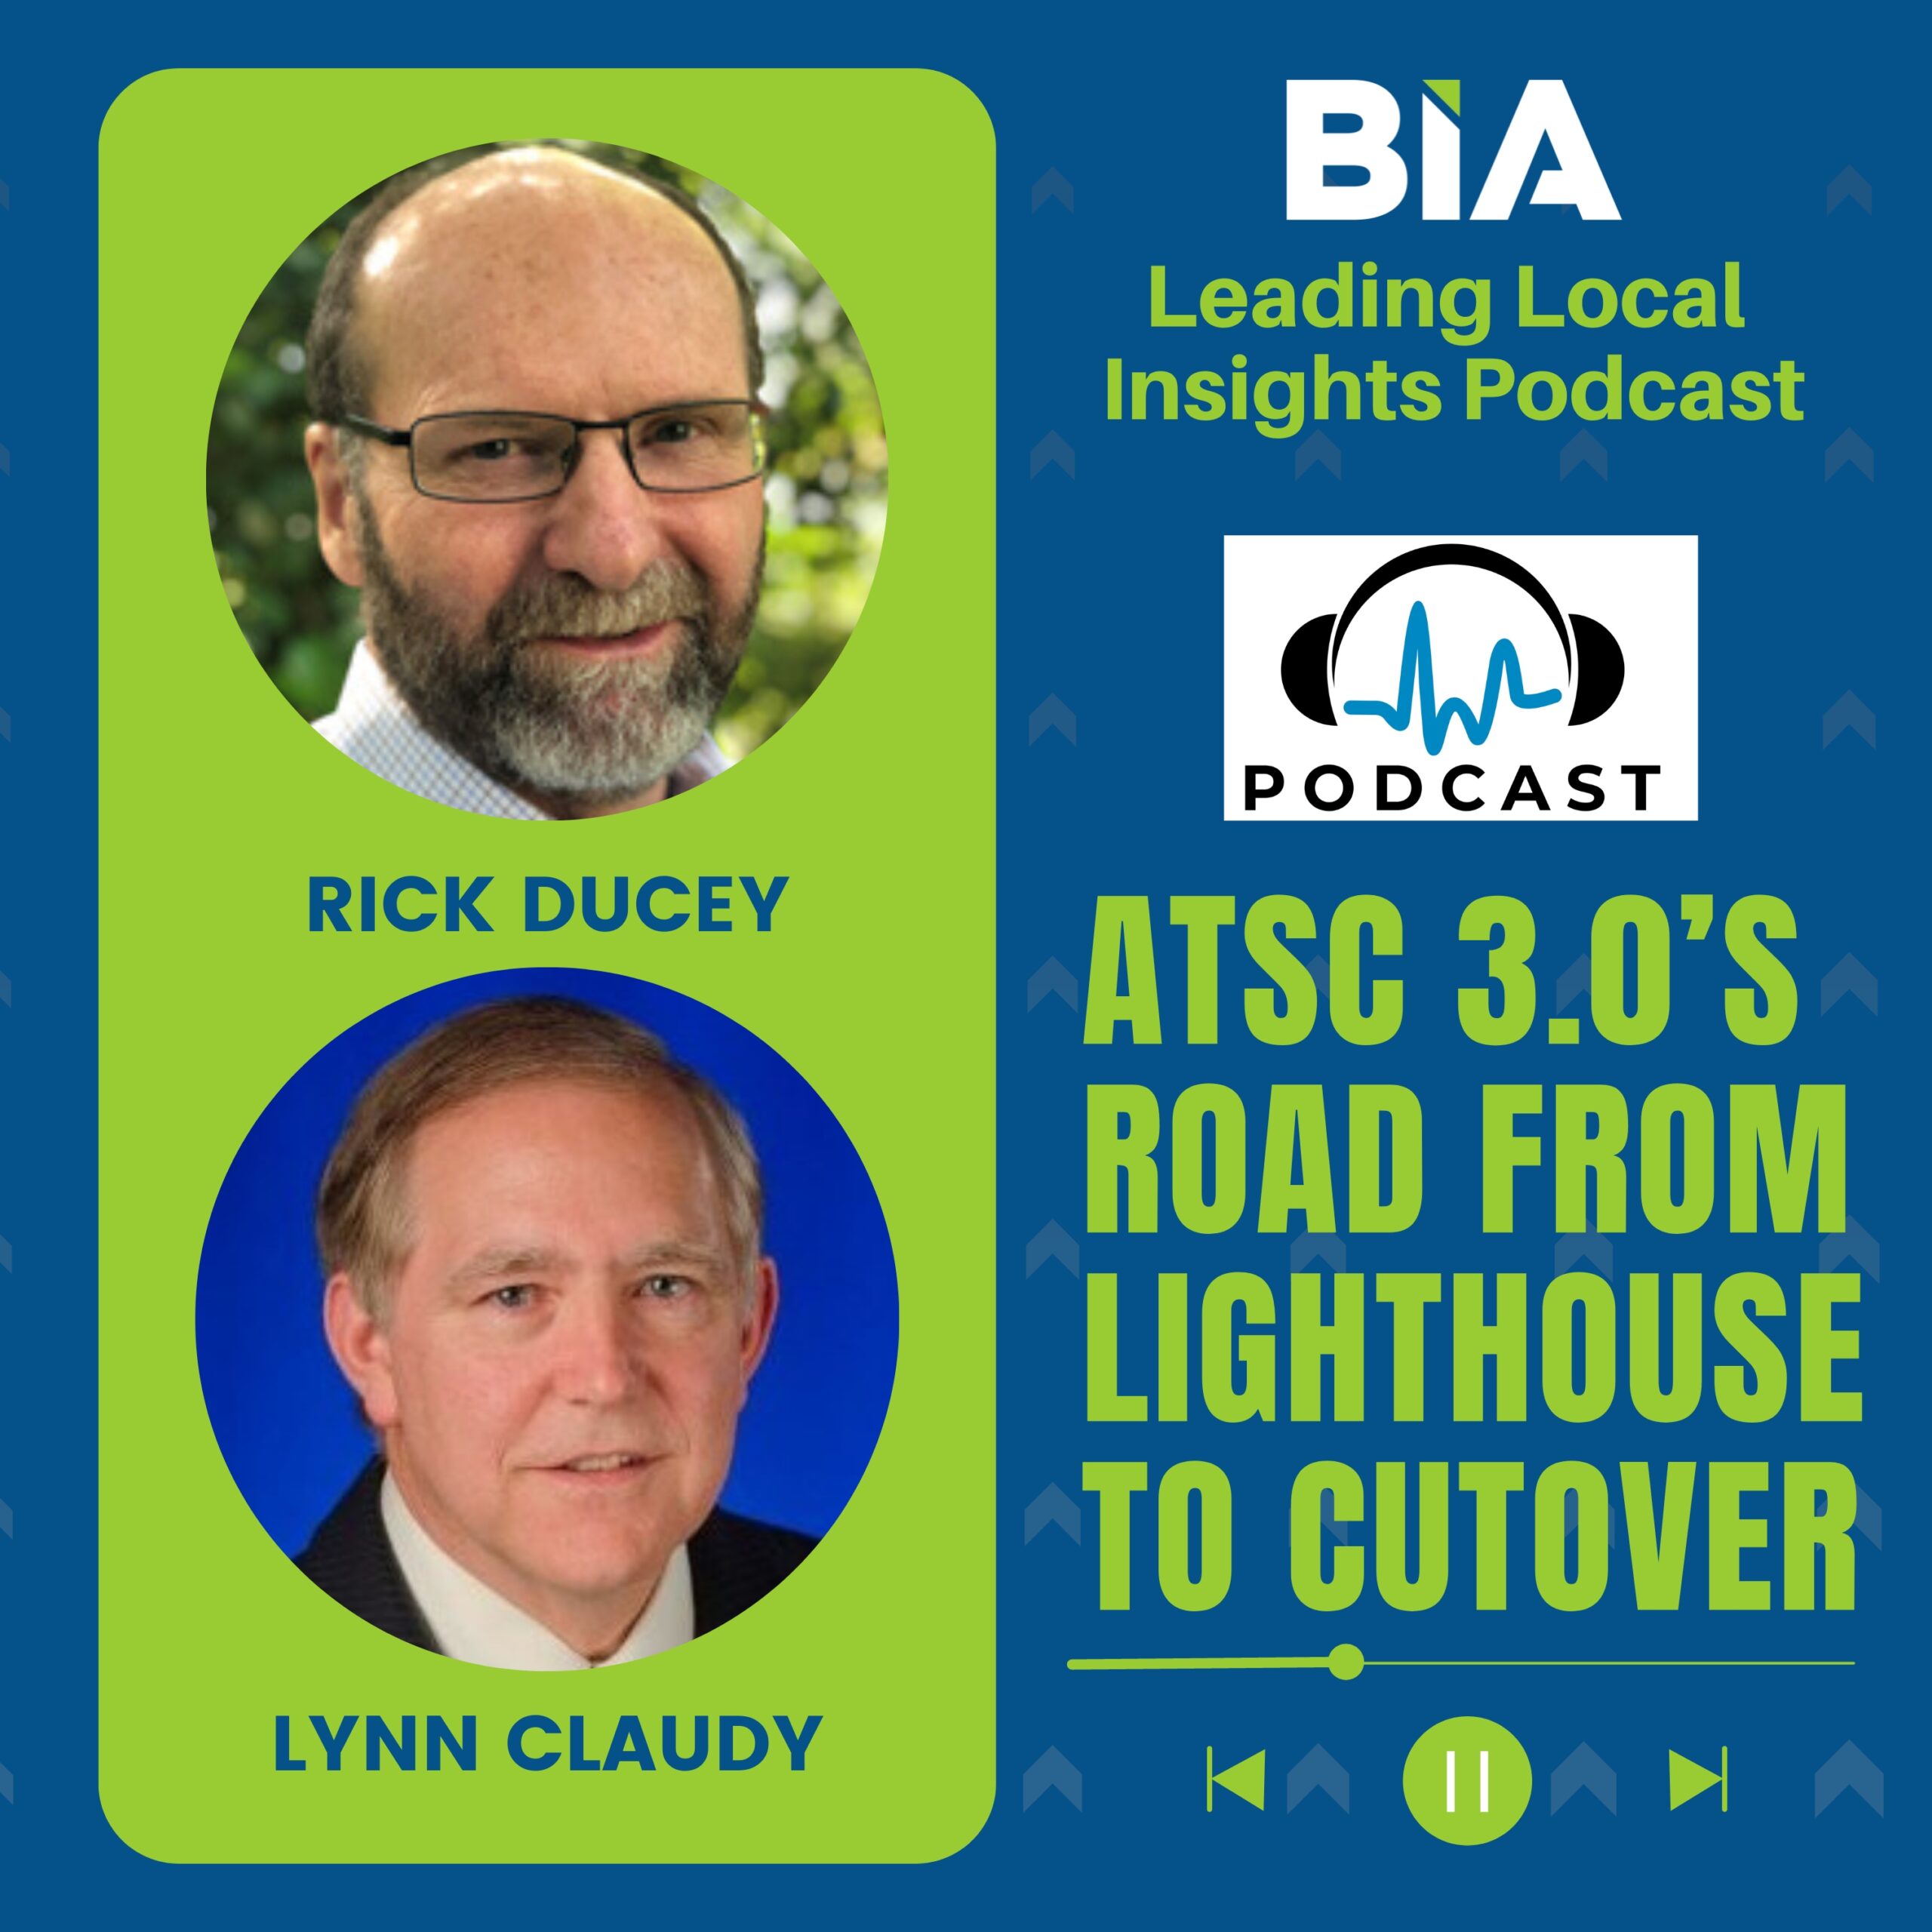 ATSC 3.0’s Road From Lighthouse To Cutover: Discussion With NAB’s Lynn Claudy On Leading Local Insights Podcast